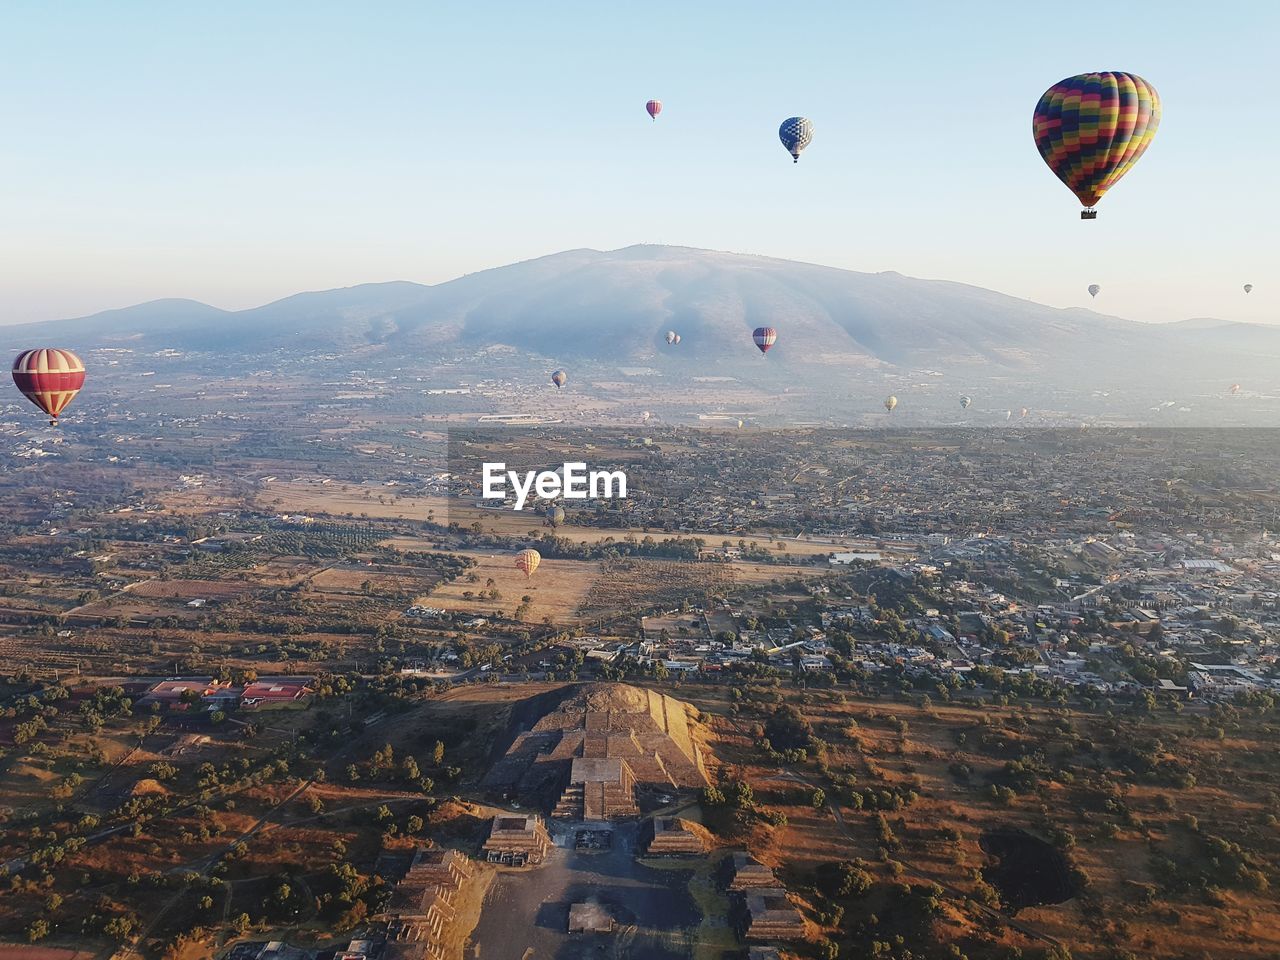 Aerial view of hot air balloons flying in city